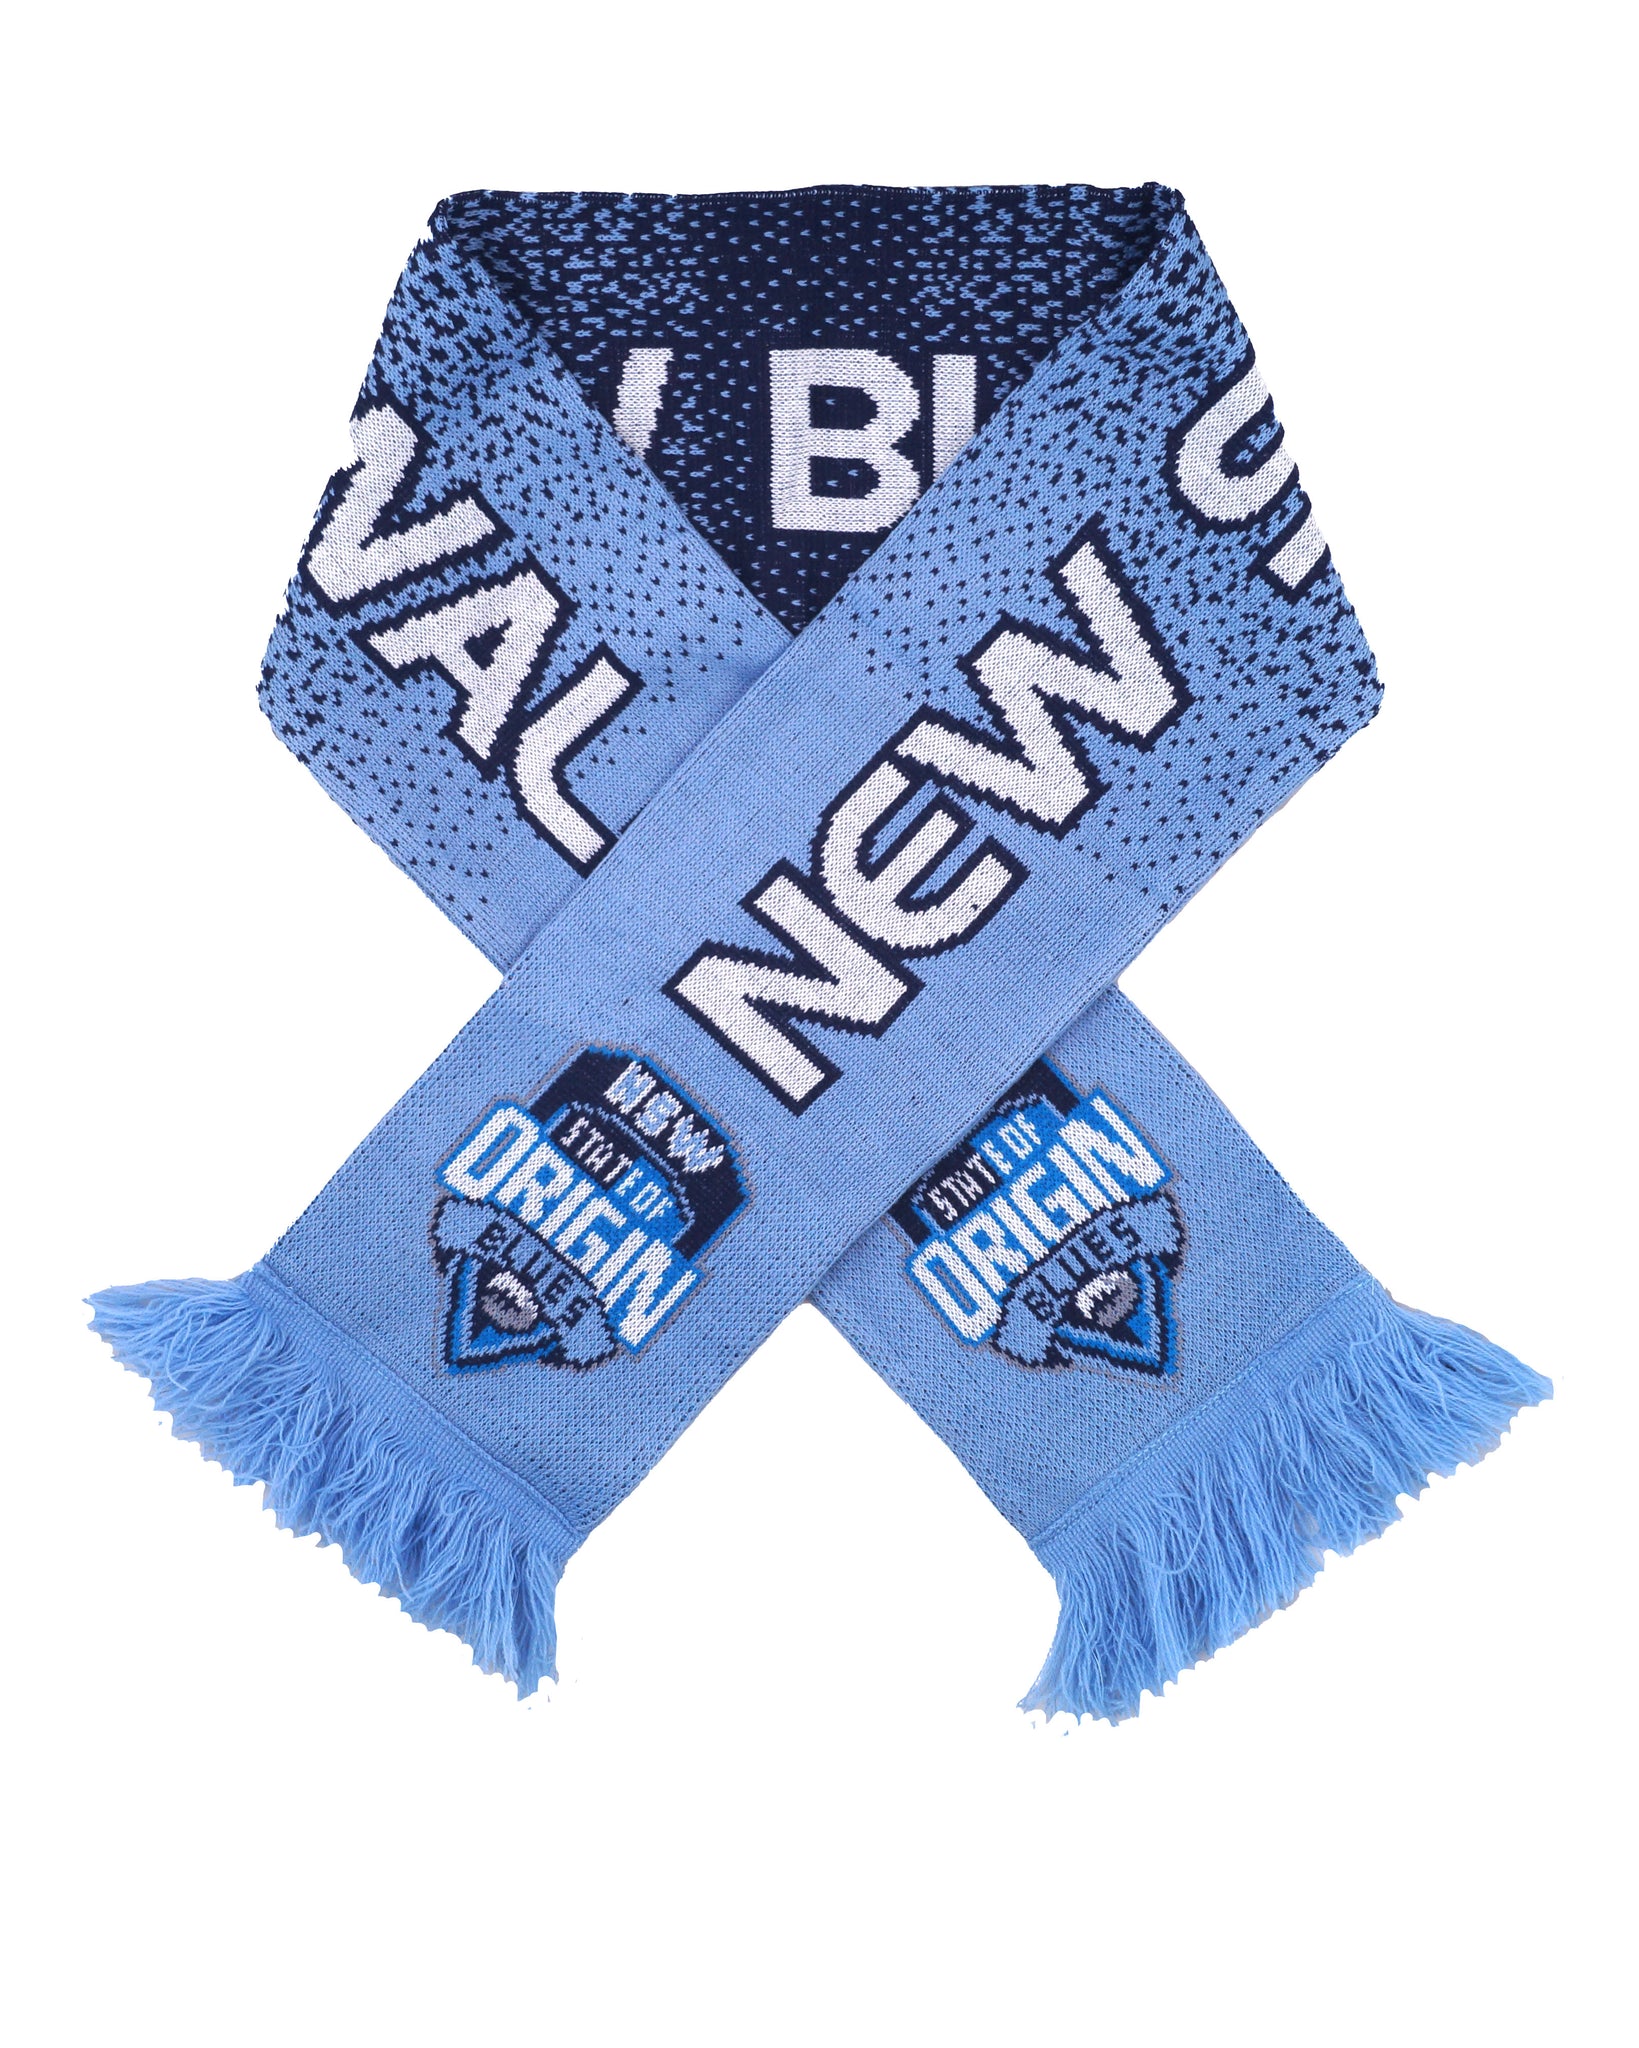 NSW SOO Supporter Scarf